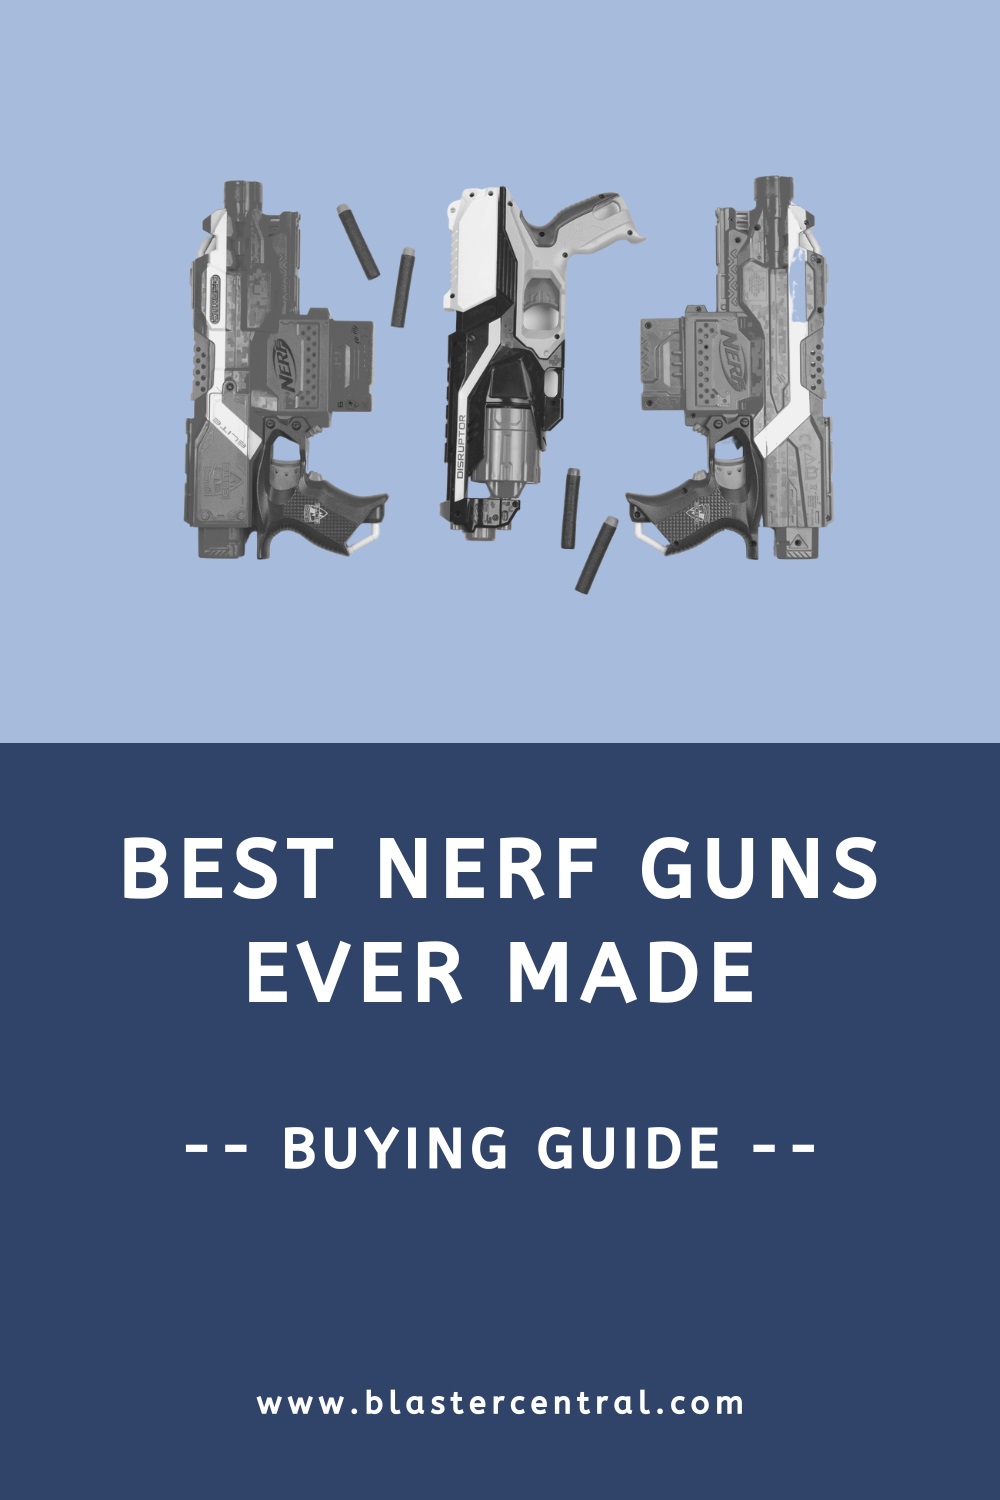 Best Nerf guns ever made (buying guide)